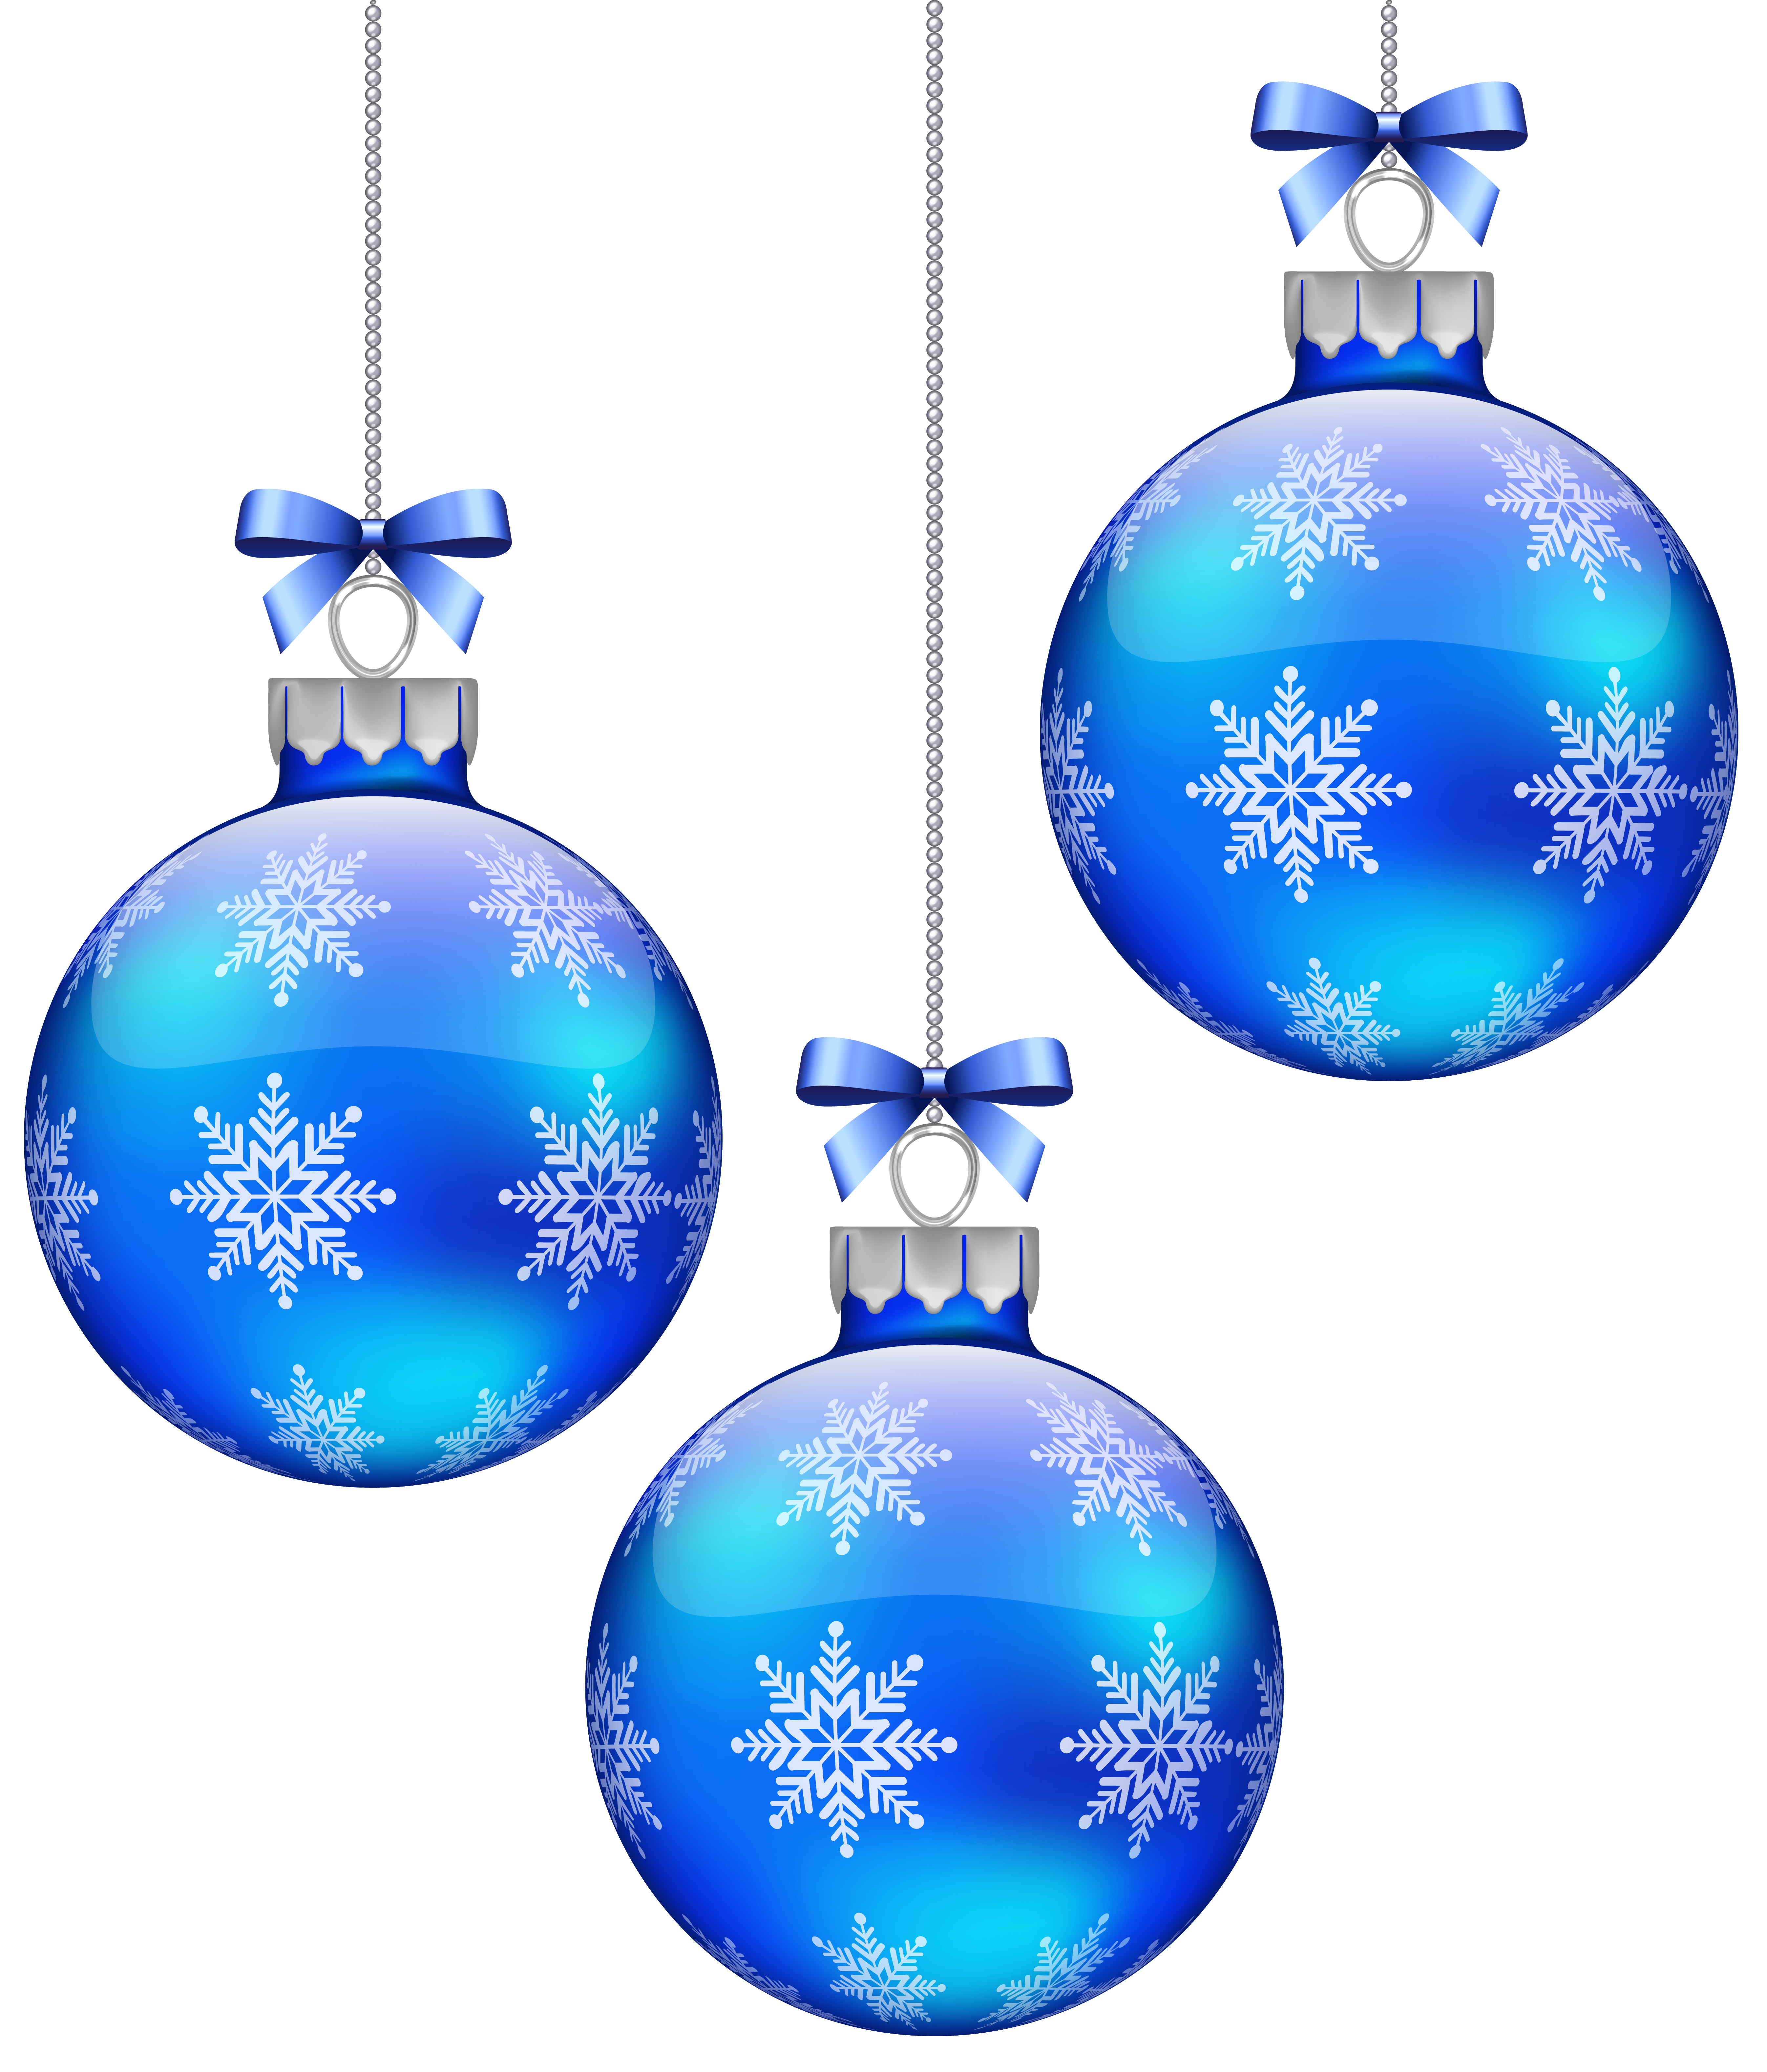 blue christmas decorations clipart - Clipground